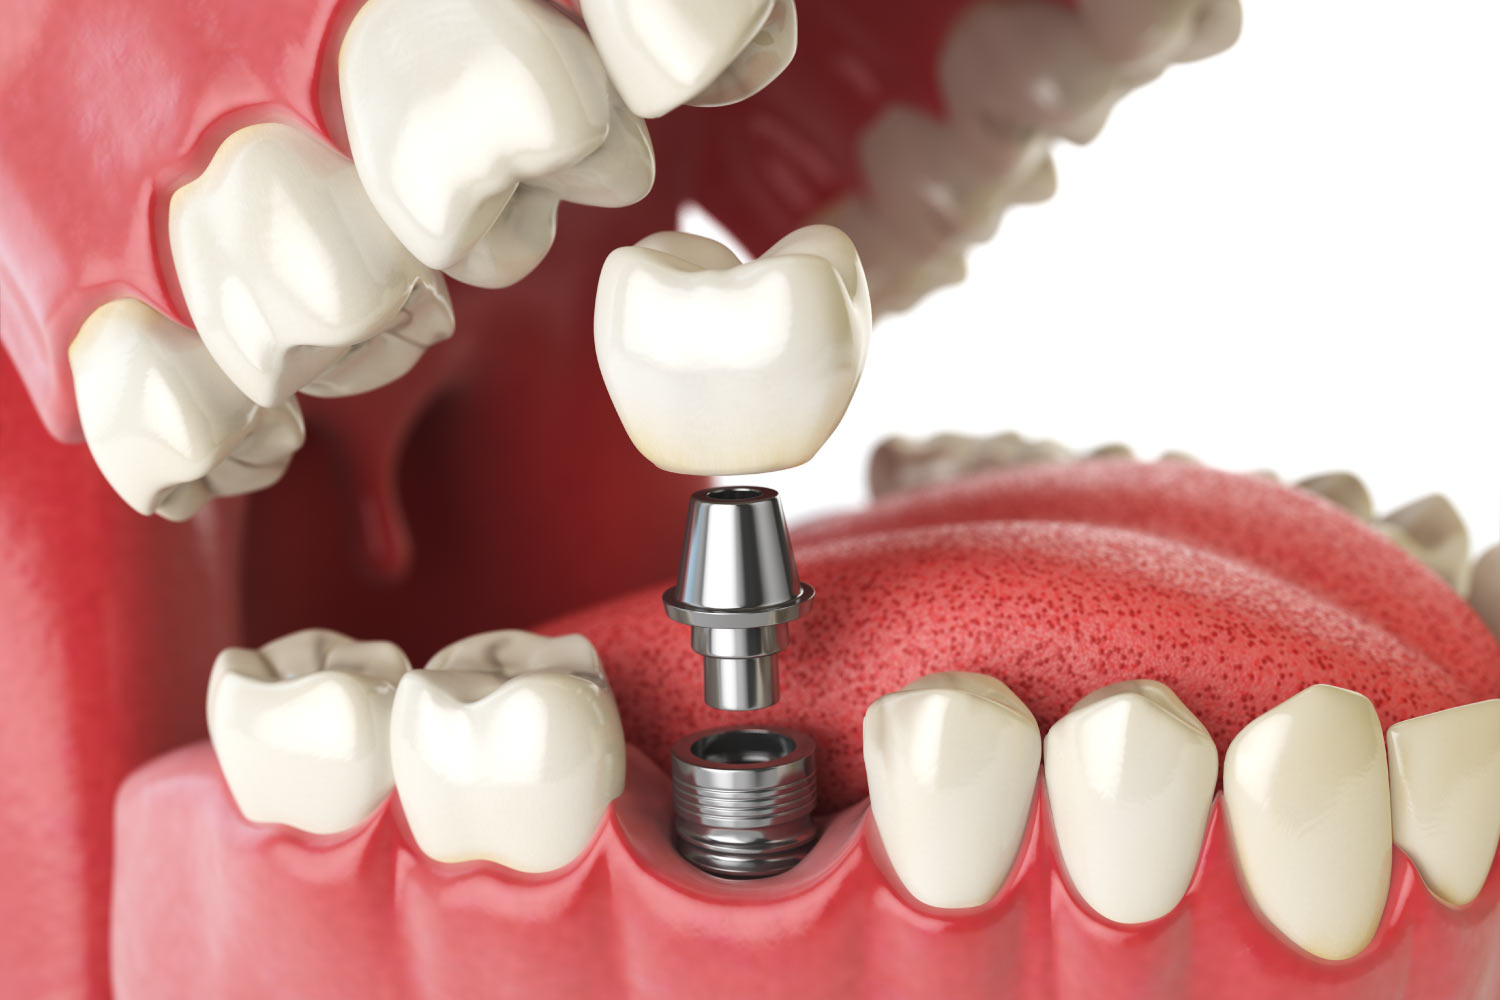 A dental implant replaces a missing permanent tooth